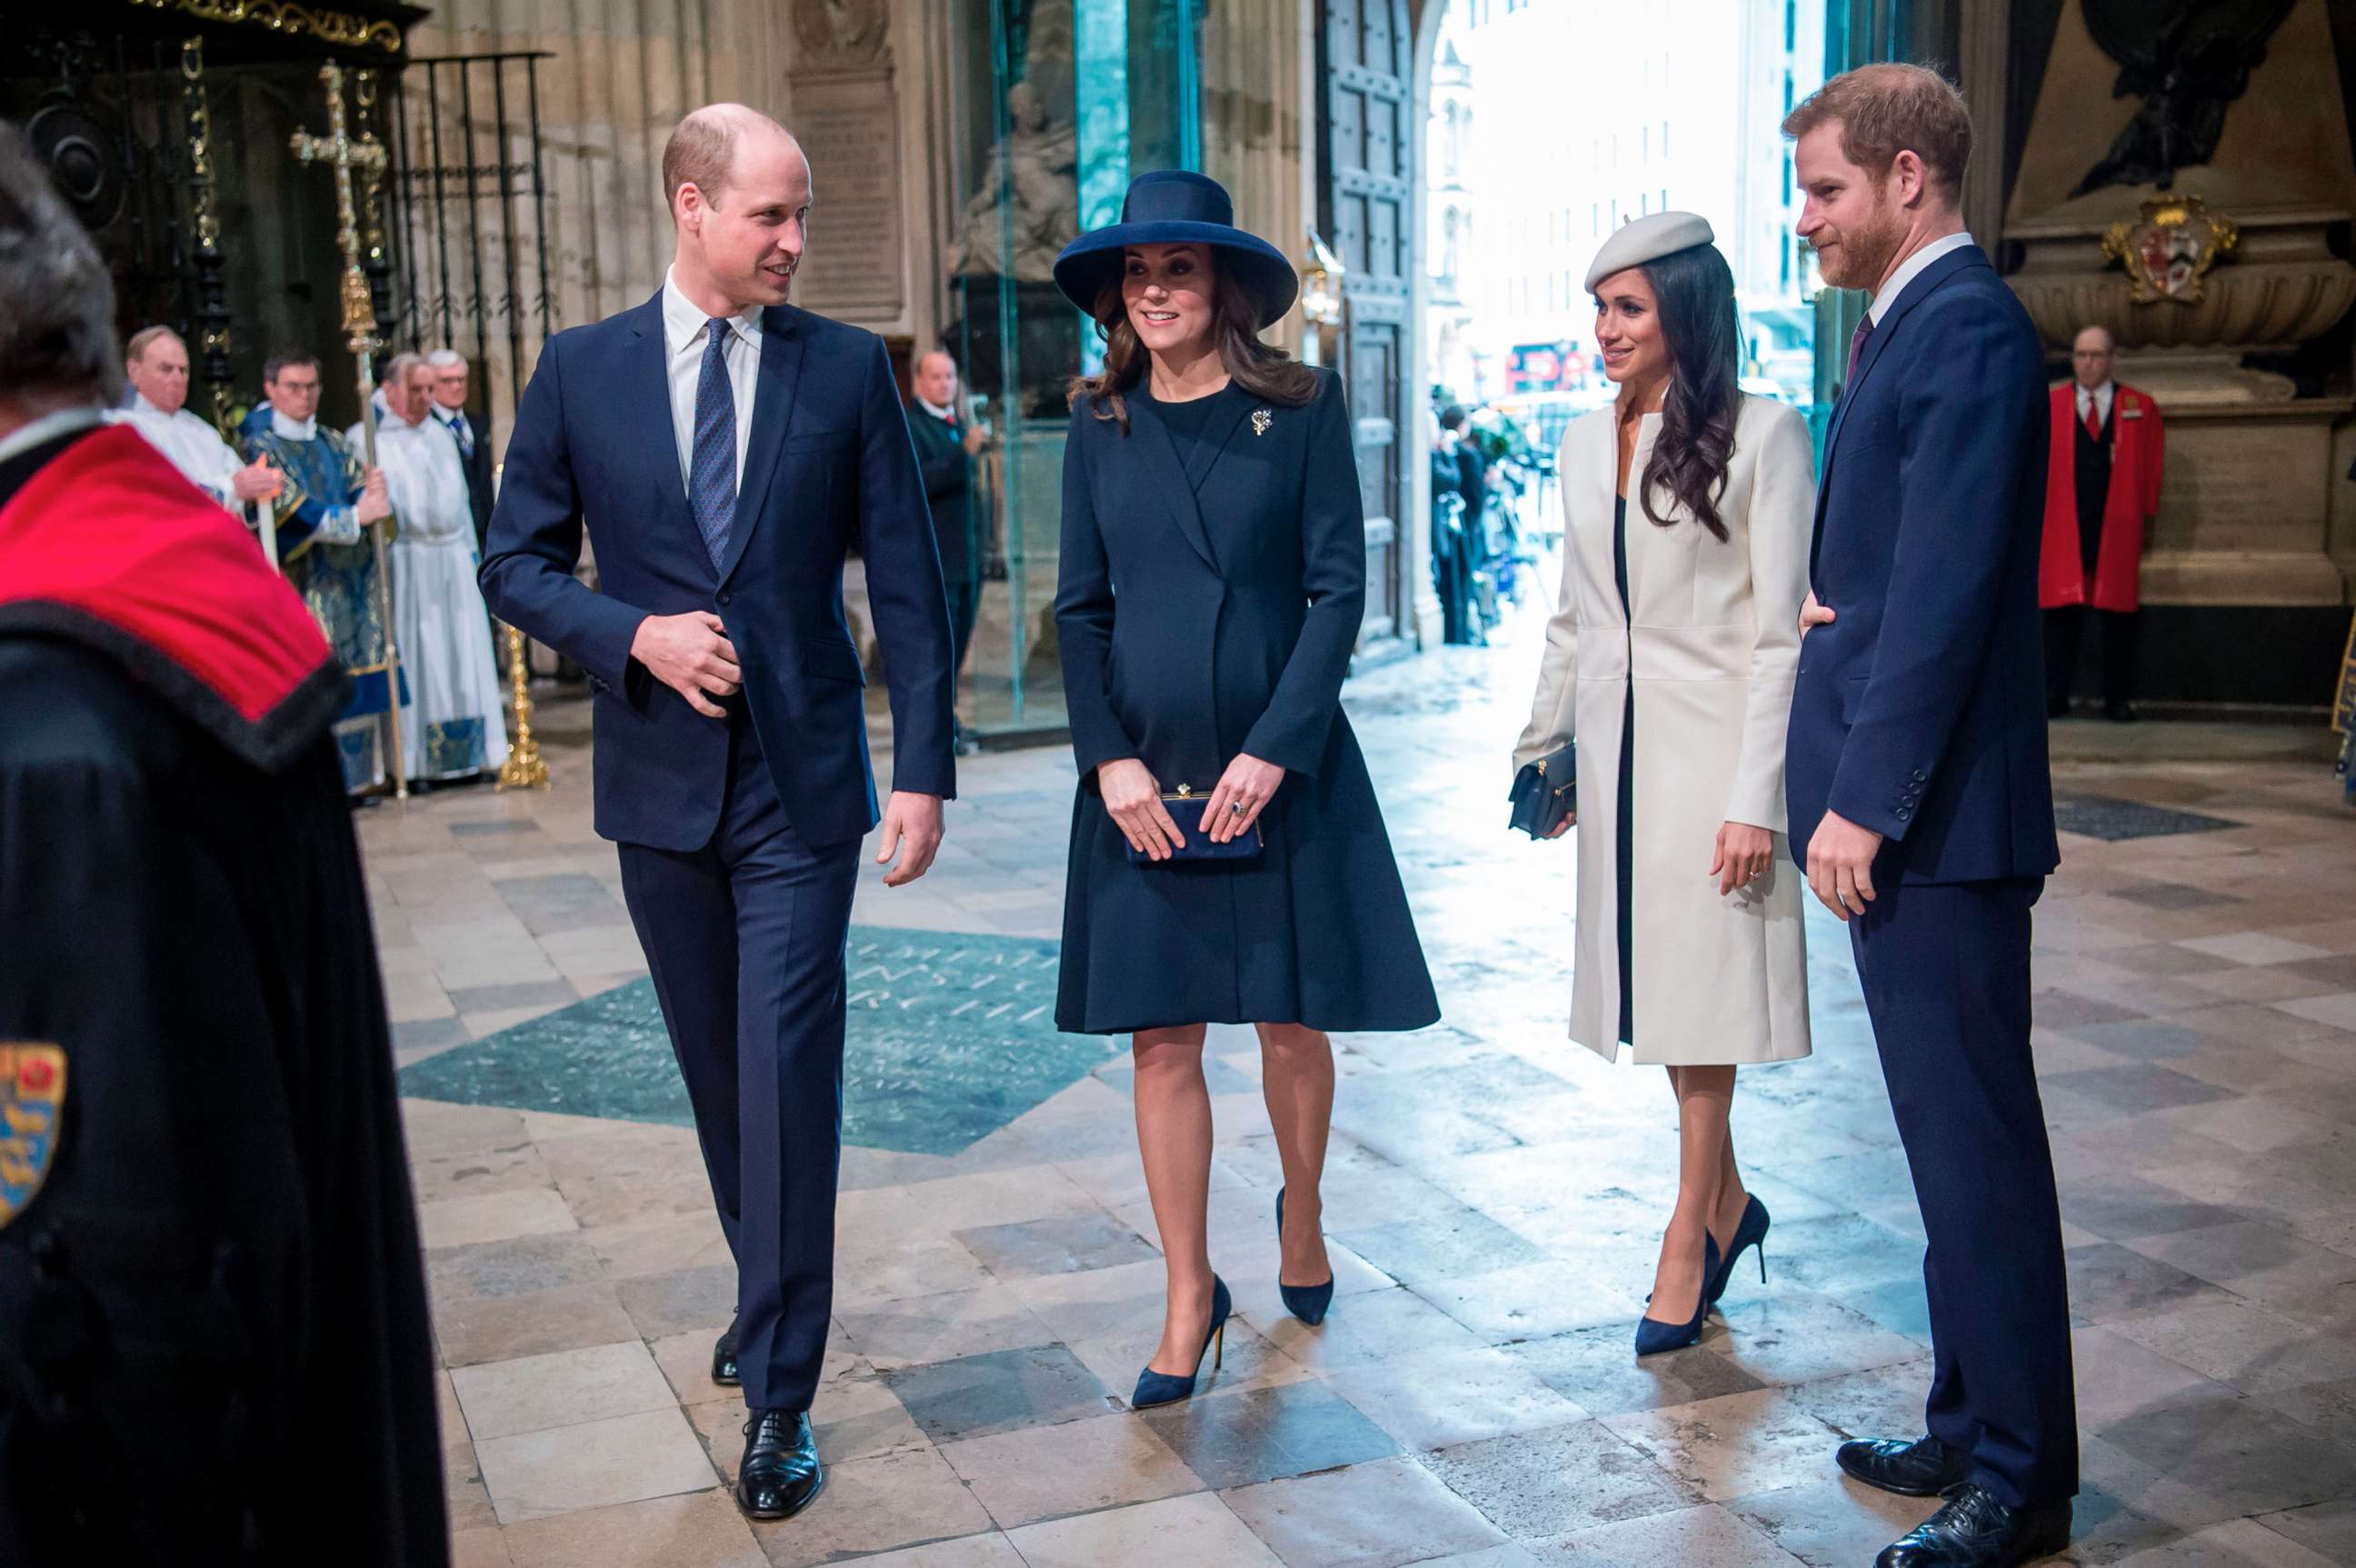 PHOTO: From left, Britain's Prince William, Catherine, Duchess of Cambridge, Meghan Markle and Britain's Prince Harry attend a Commonwealth Day Service at Westminster Abbey in central London, on March 12, 2018.